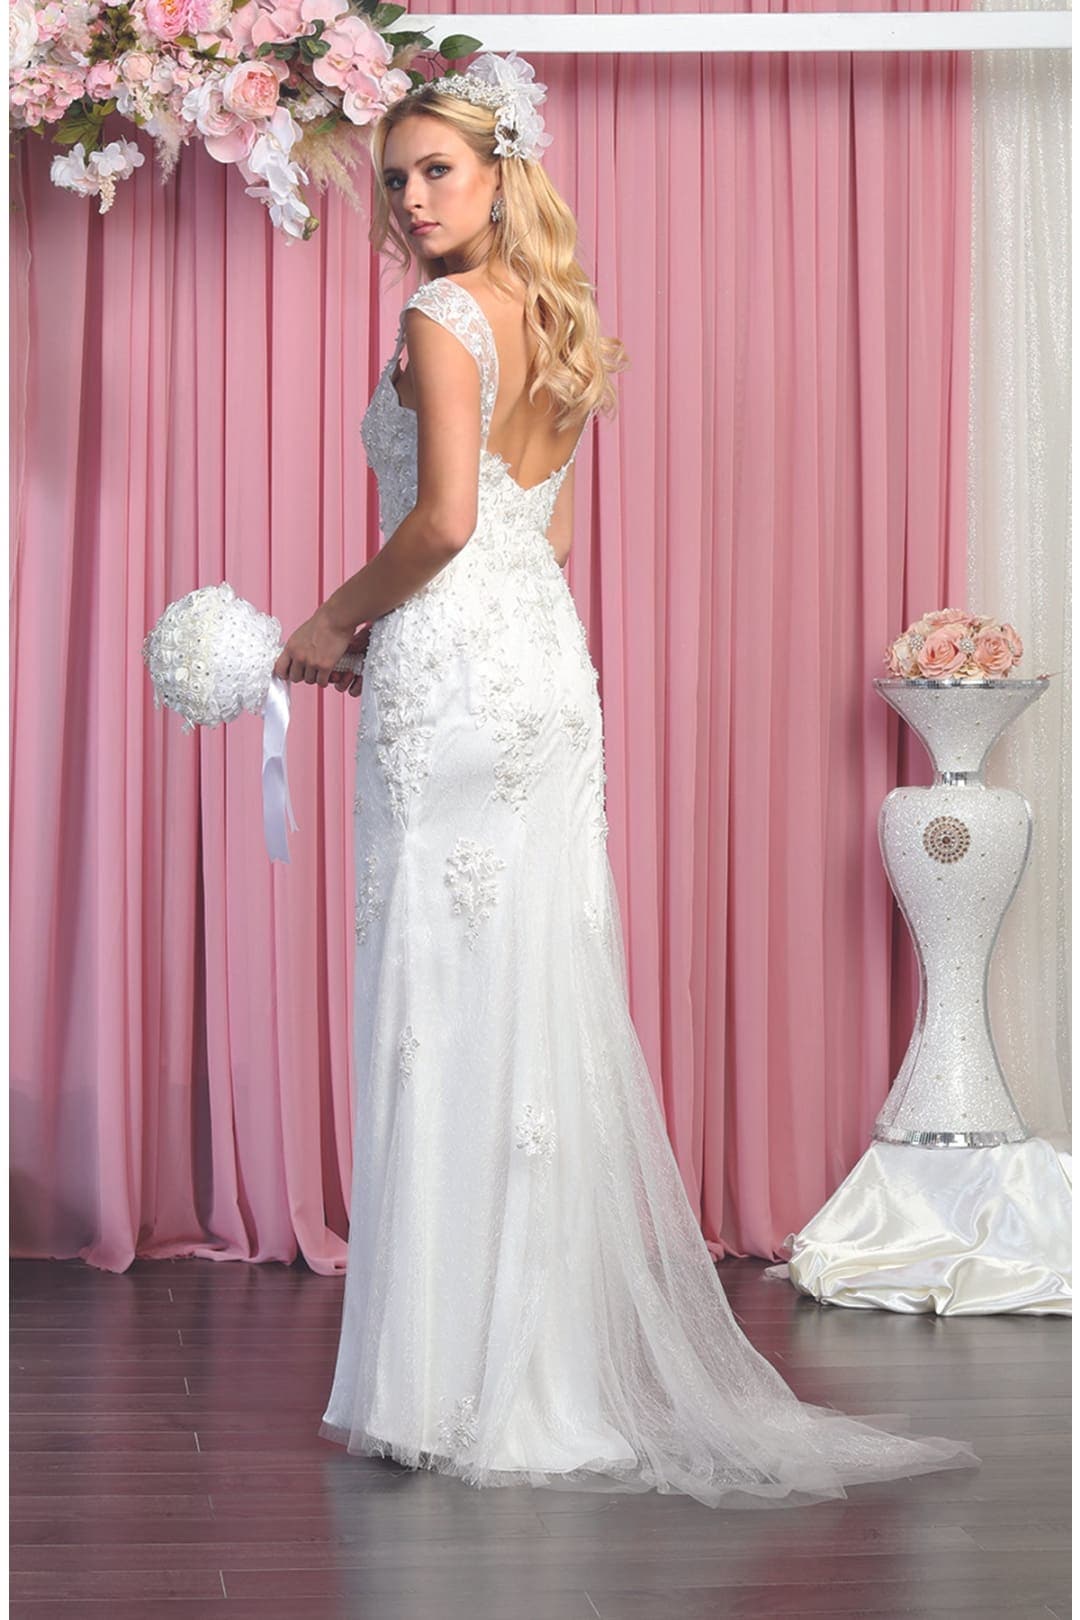 Ivory Wedding Formal Gown